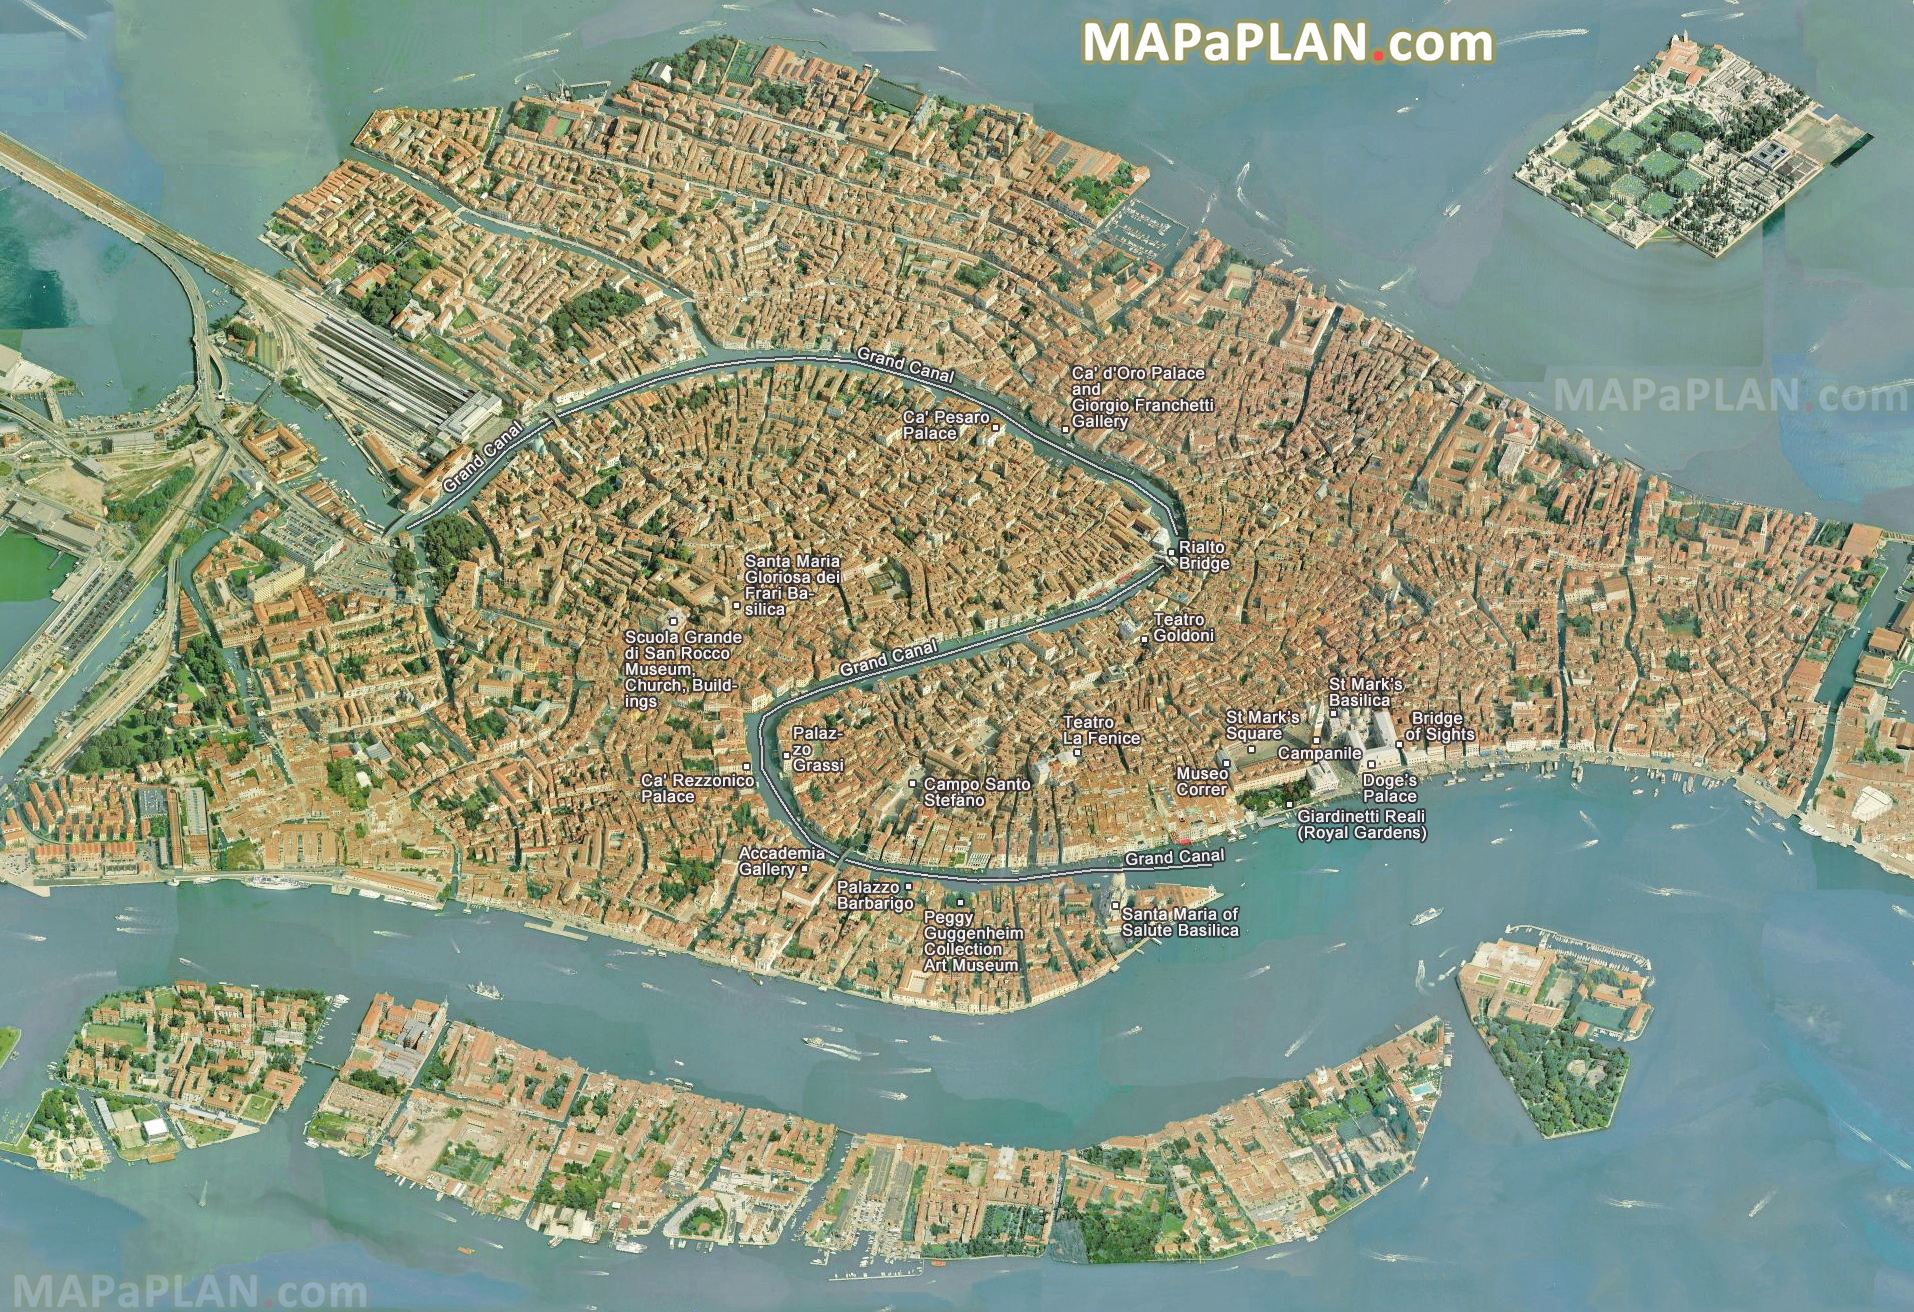 Grand Canal main buildings birds eye 3d aerial view Venice top tourist attractions map